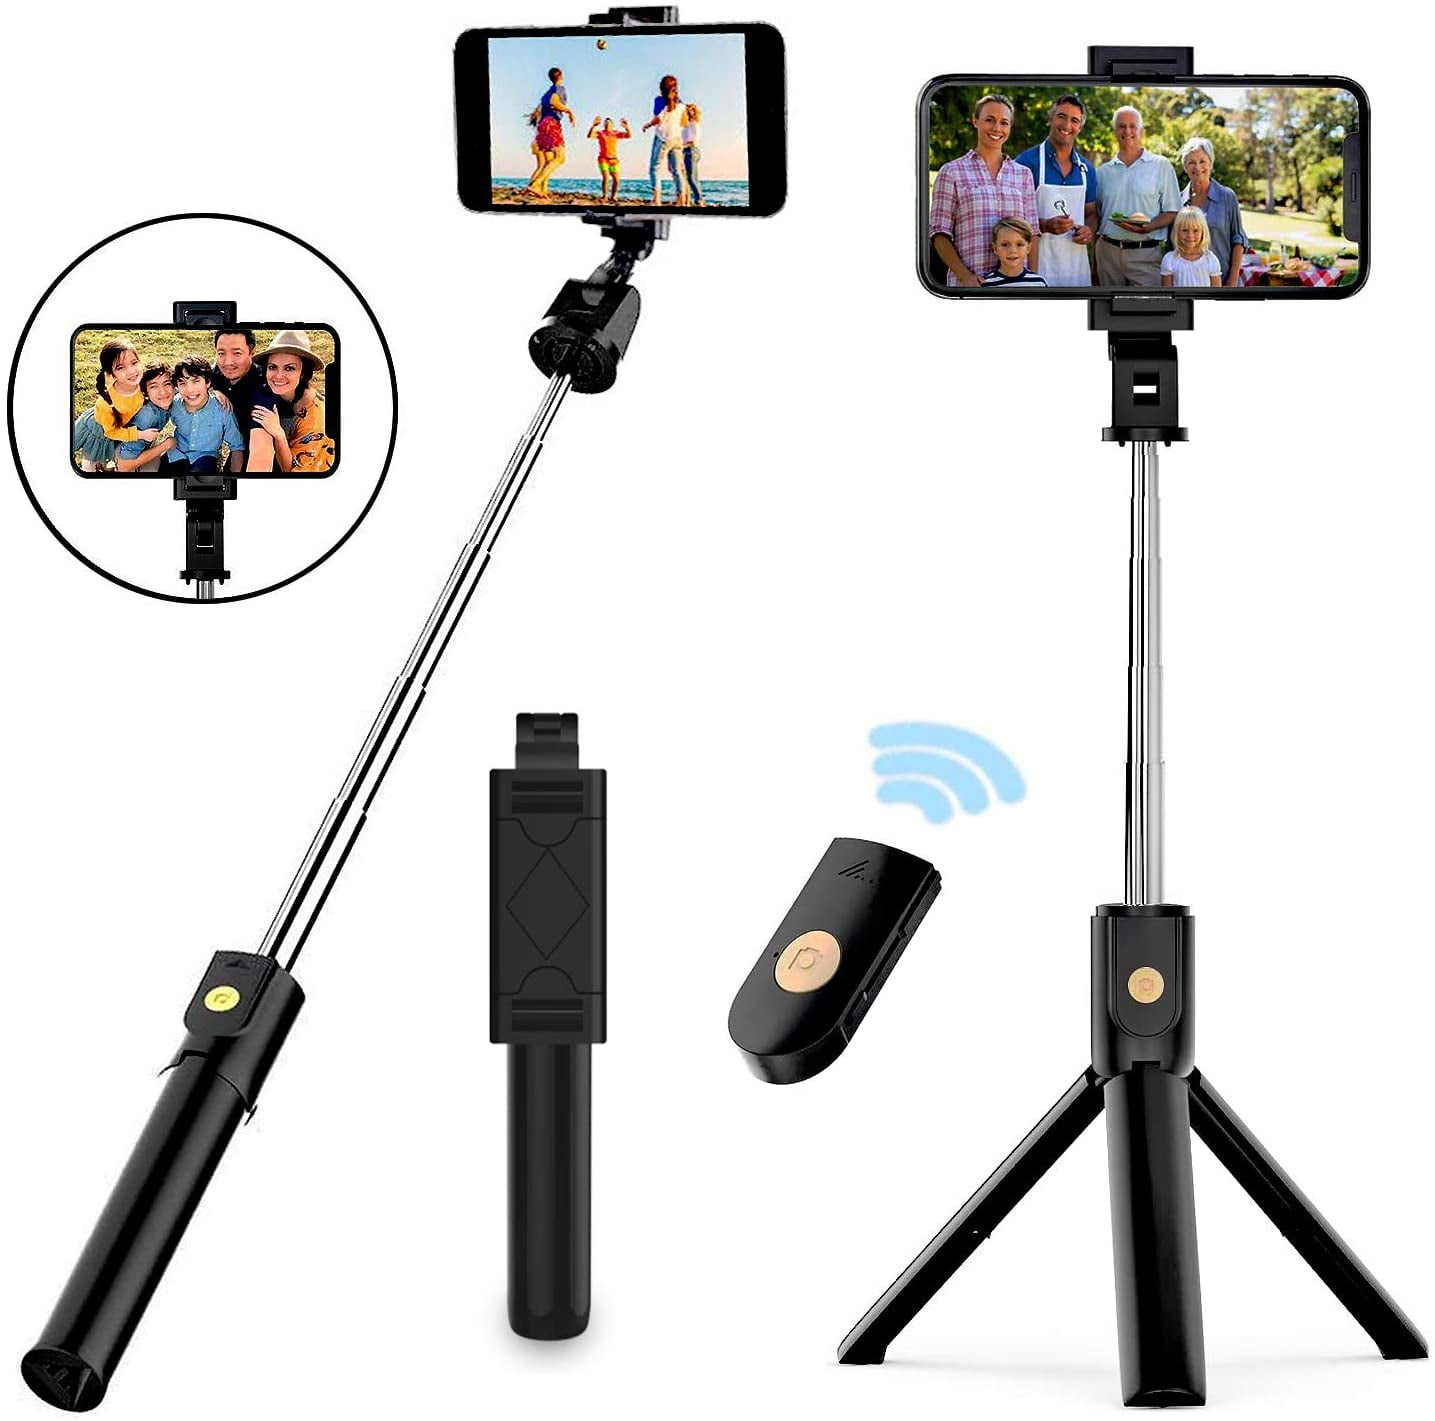 Bluetooth Selfie Stick with Tripod Extendable Compact Phone Stick with Wireless Remote and Extra Shutte Stand for iPhone 8 Plus/Xs Max/XR Galaxy Note 9/S10/S9 Huawei More iOS&Android Black